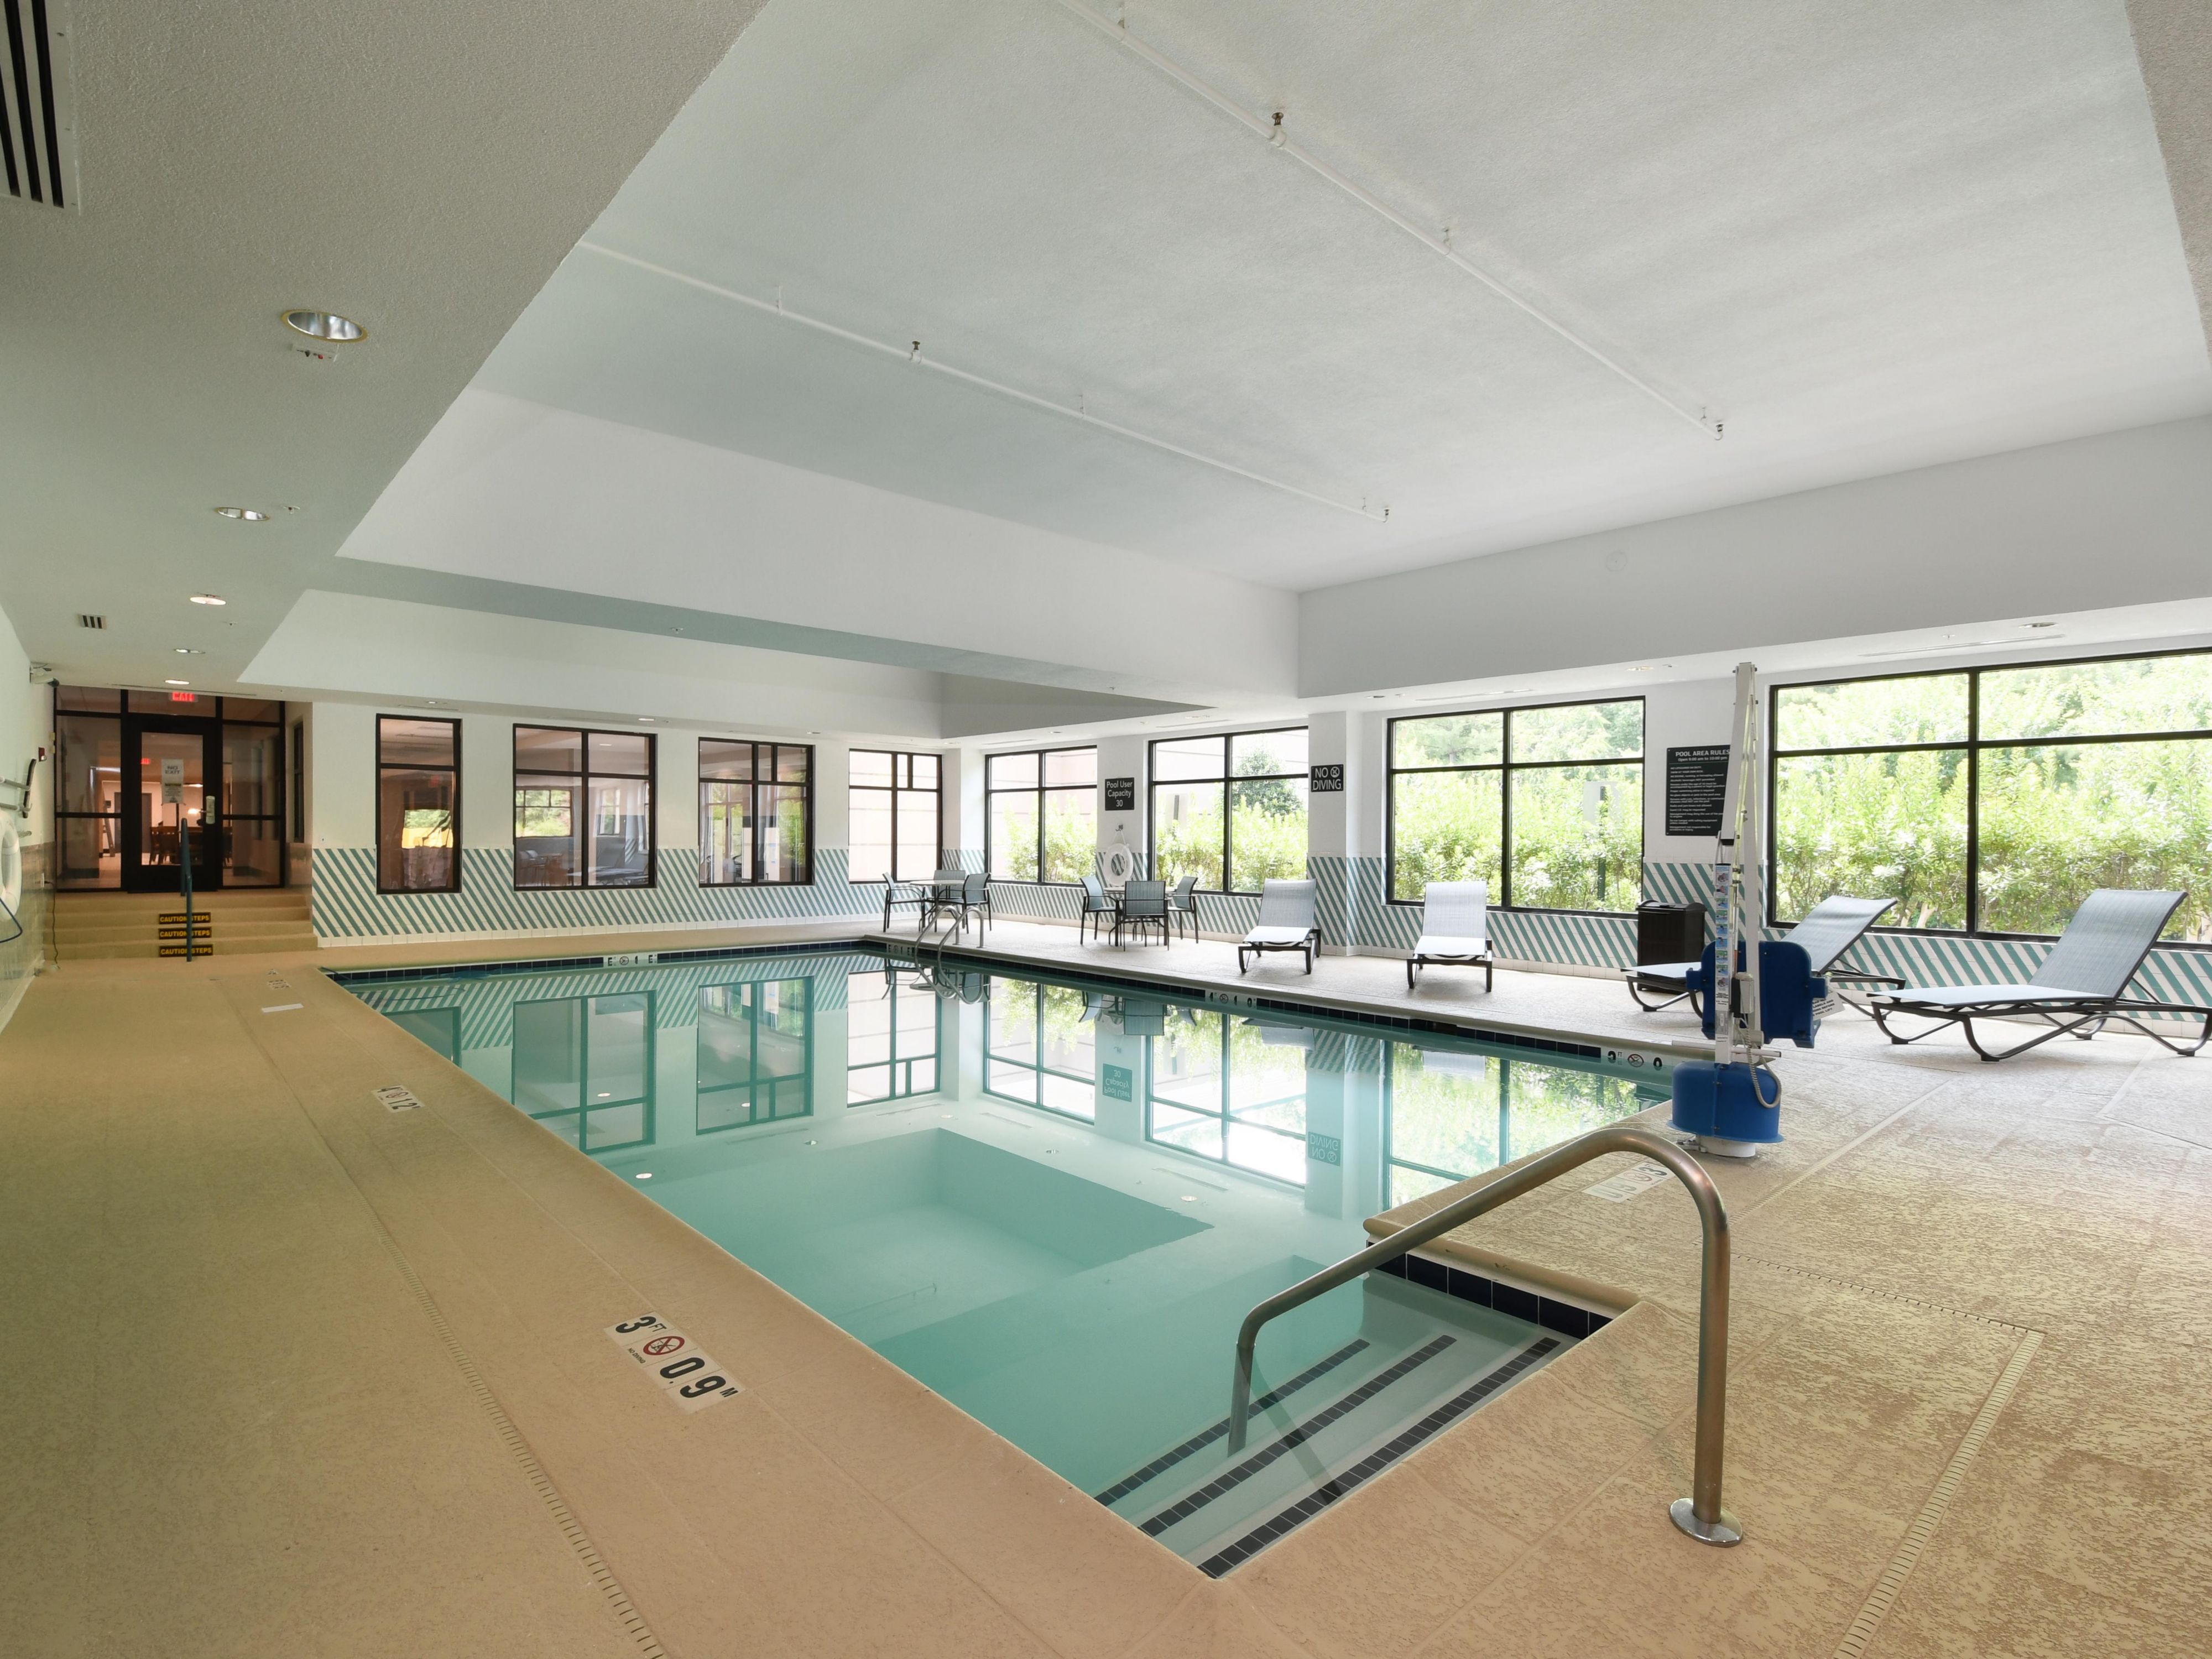 Dive In and Make a Splash! Enjoy our inside heated pool through out the year. Opens from 9 AM - 10 PM.